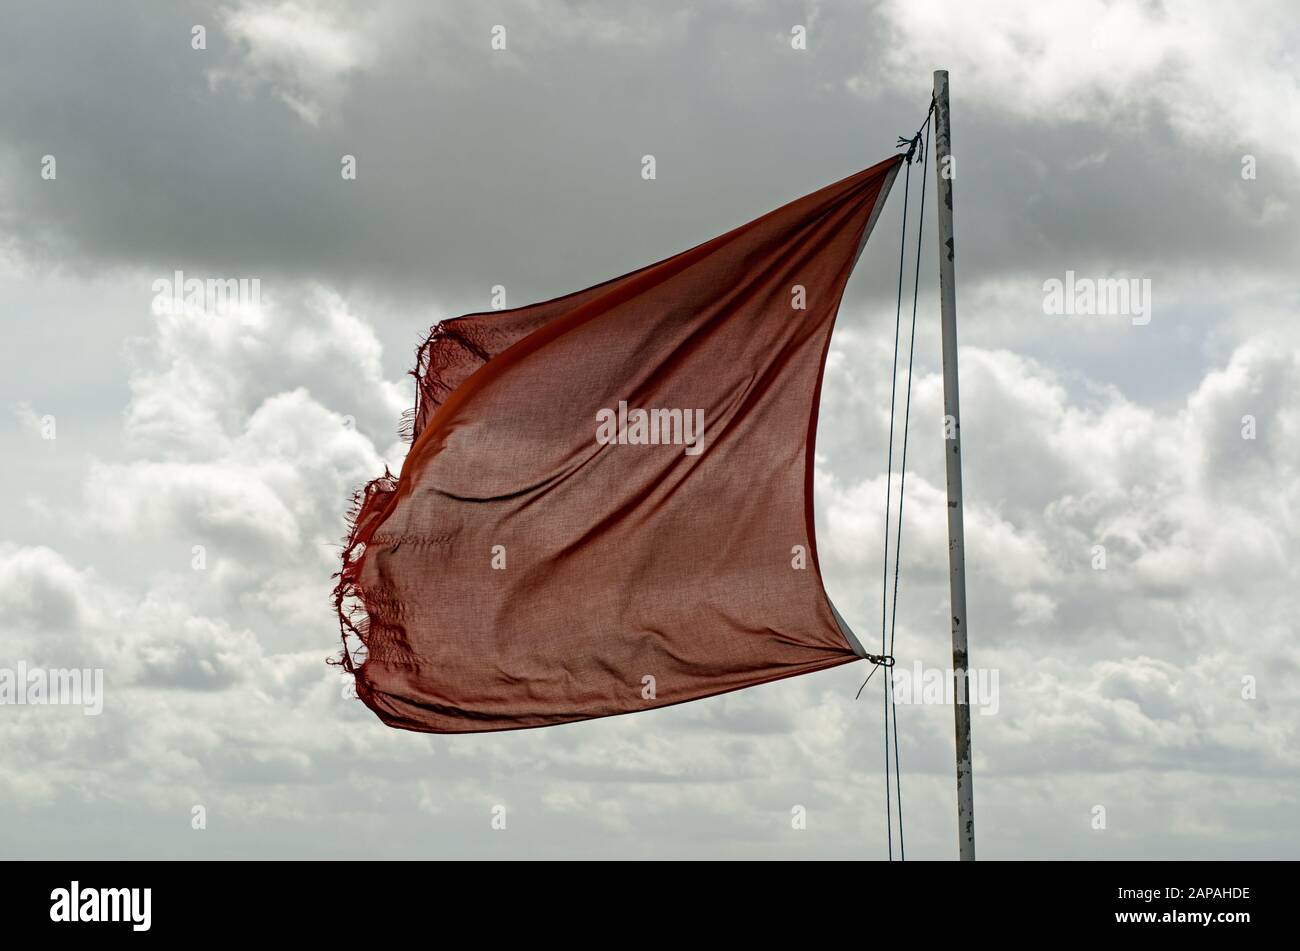 Slightly tatty red flag flying over Salisbury Plain in Wiltshire warning of army activity in the military controlled area. Stock Photo